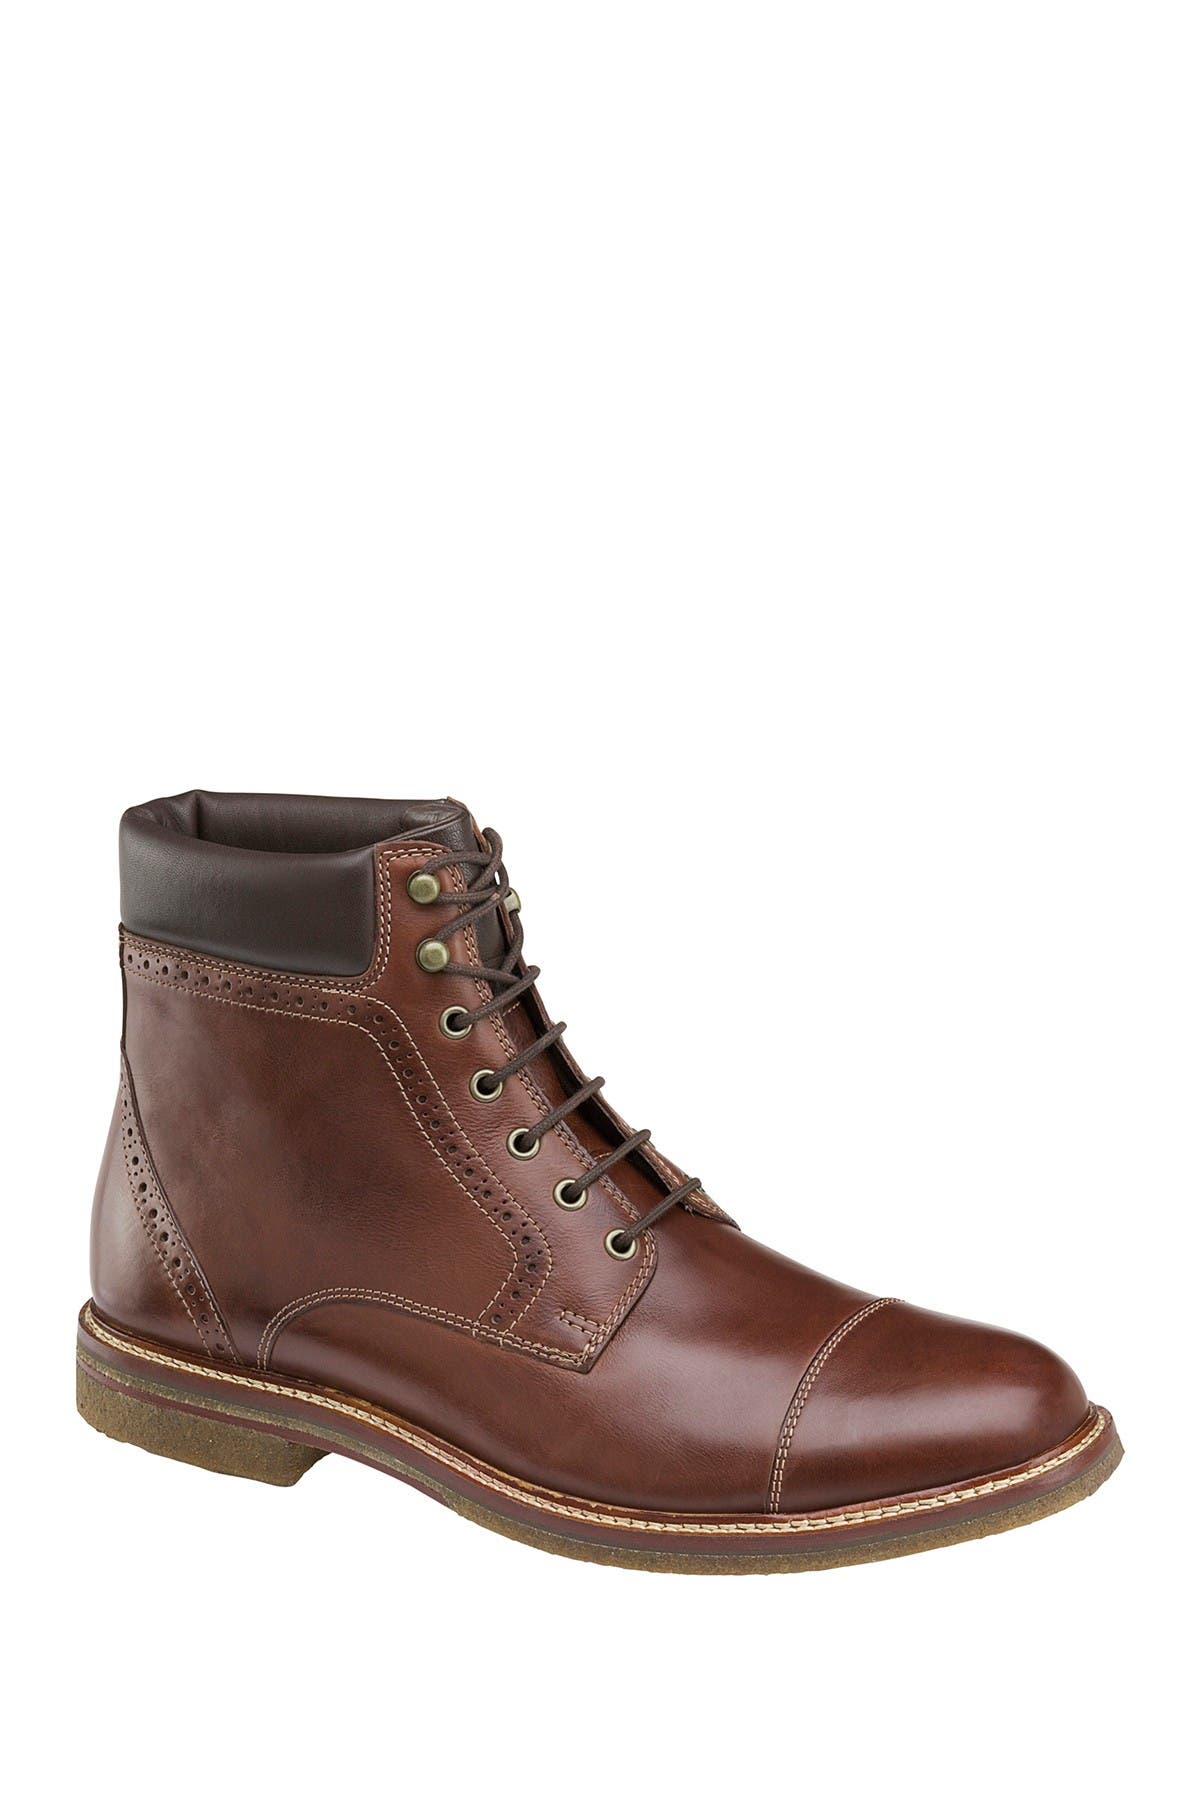 johnston and murphy forrester cap toe boot